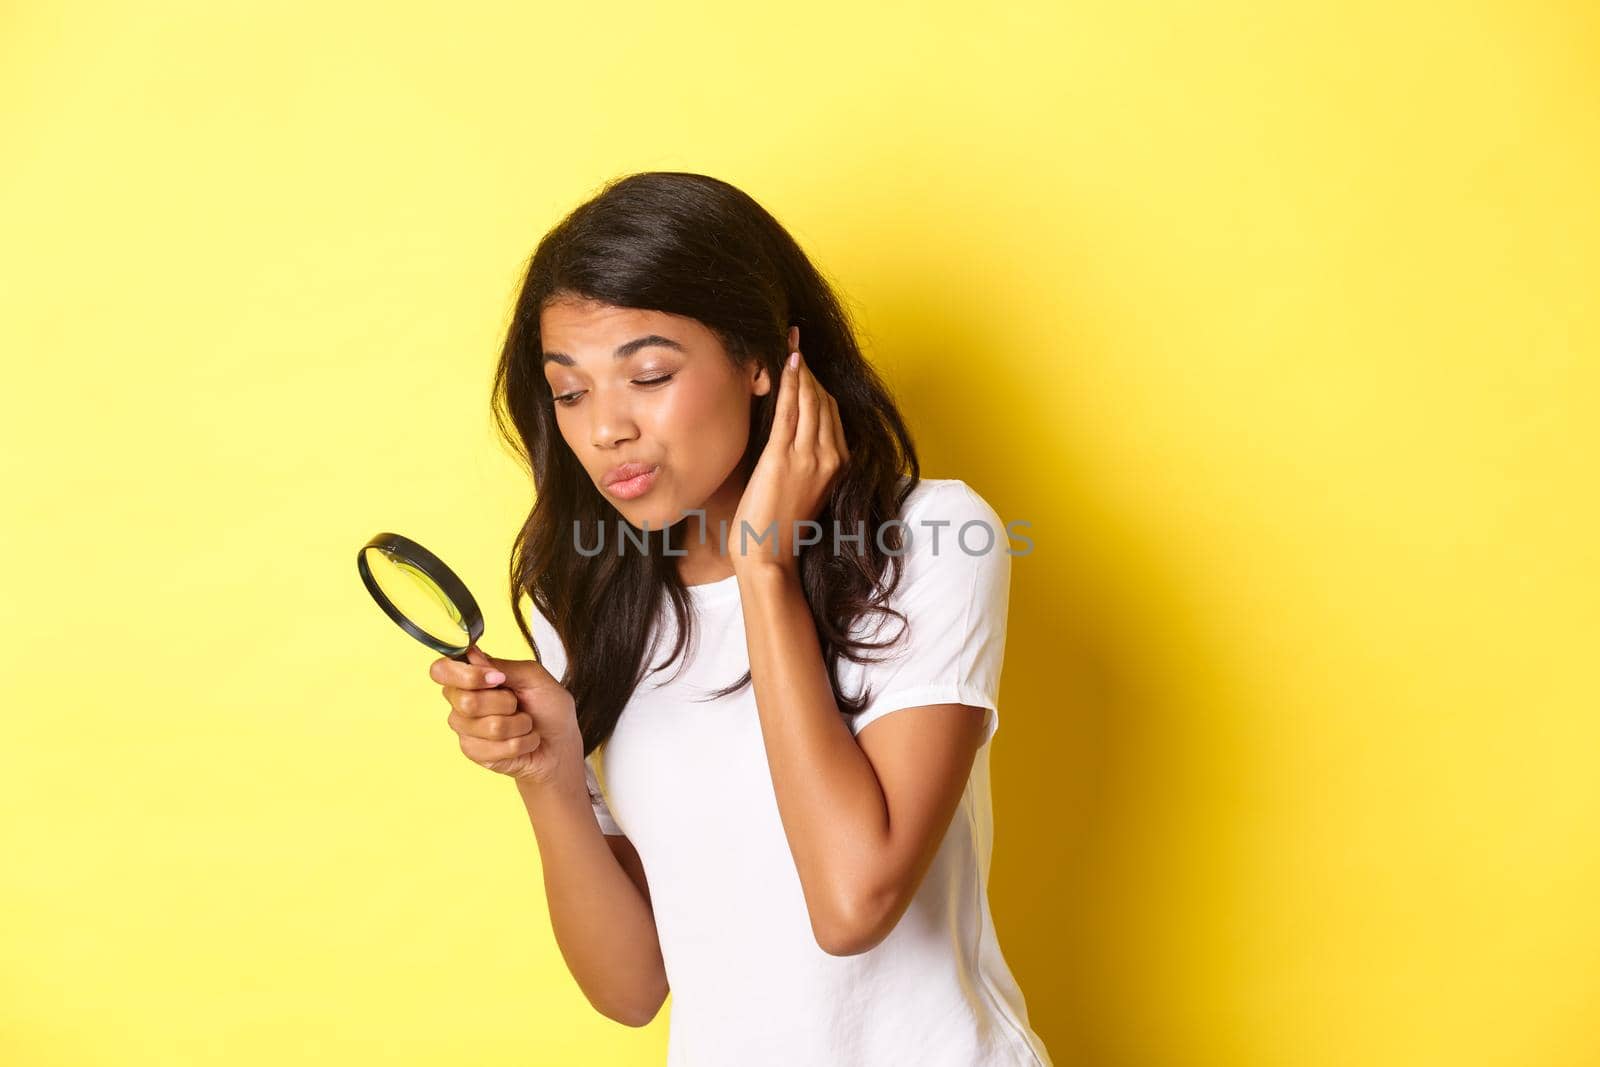 Image of cute african-american woman searching for something with magnifying glass, looking down, standing over yellow background.